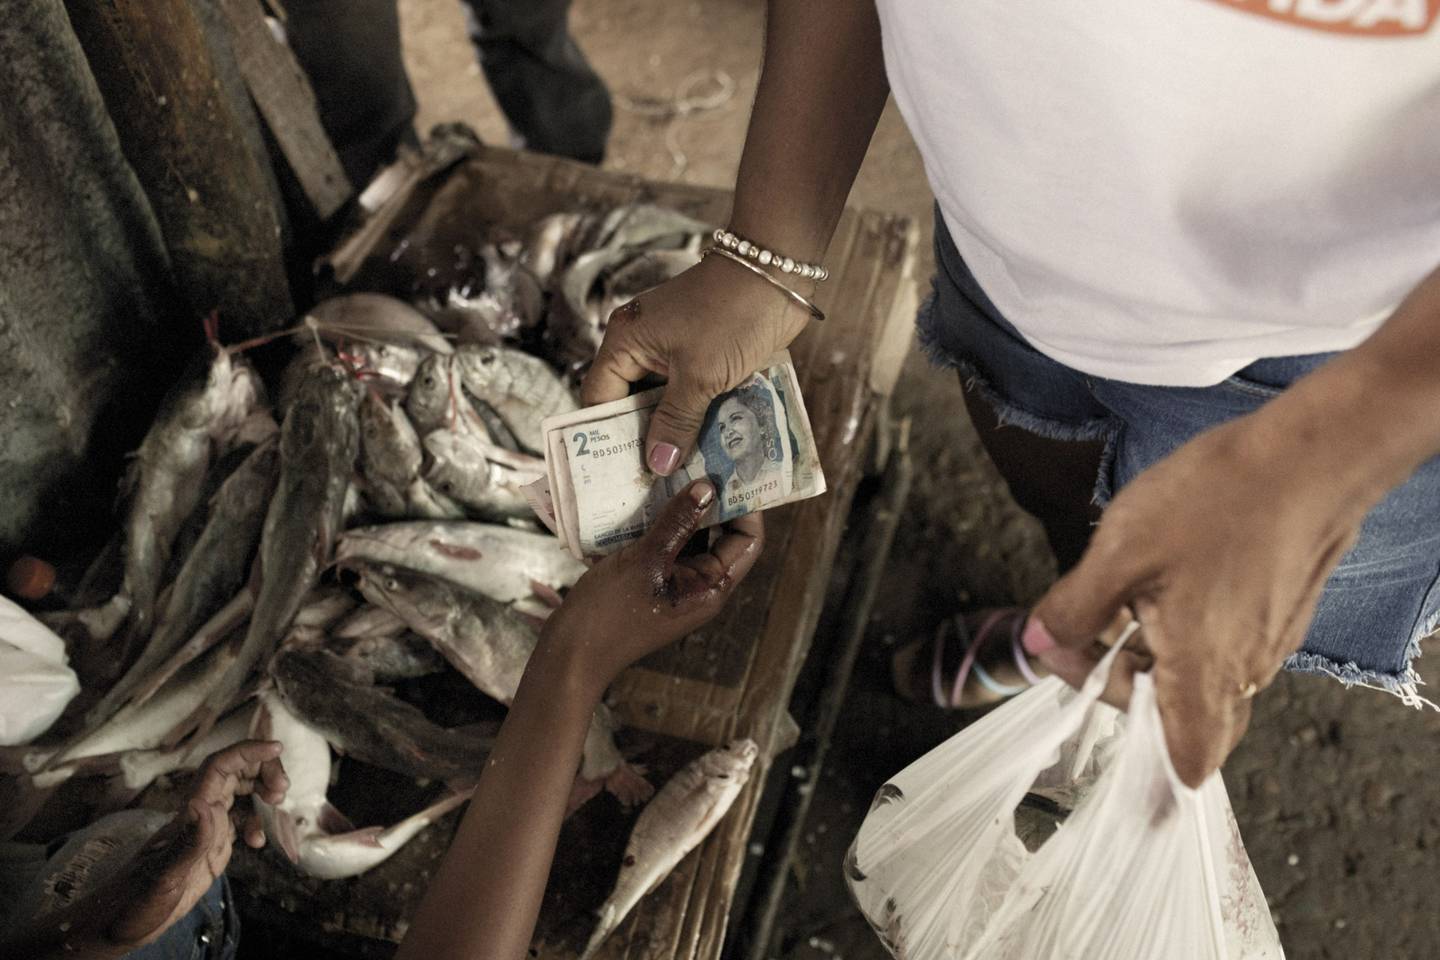 A customer pays for fish in a food market in Riohacha, Colombia.